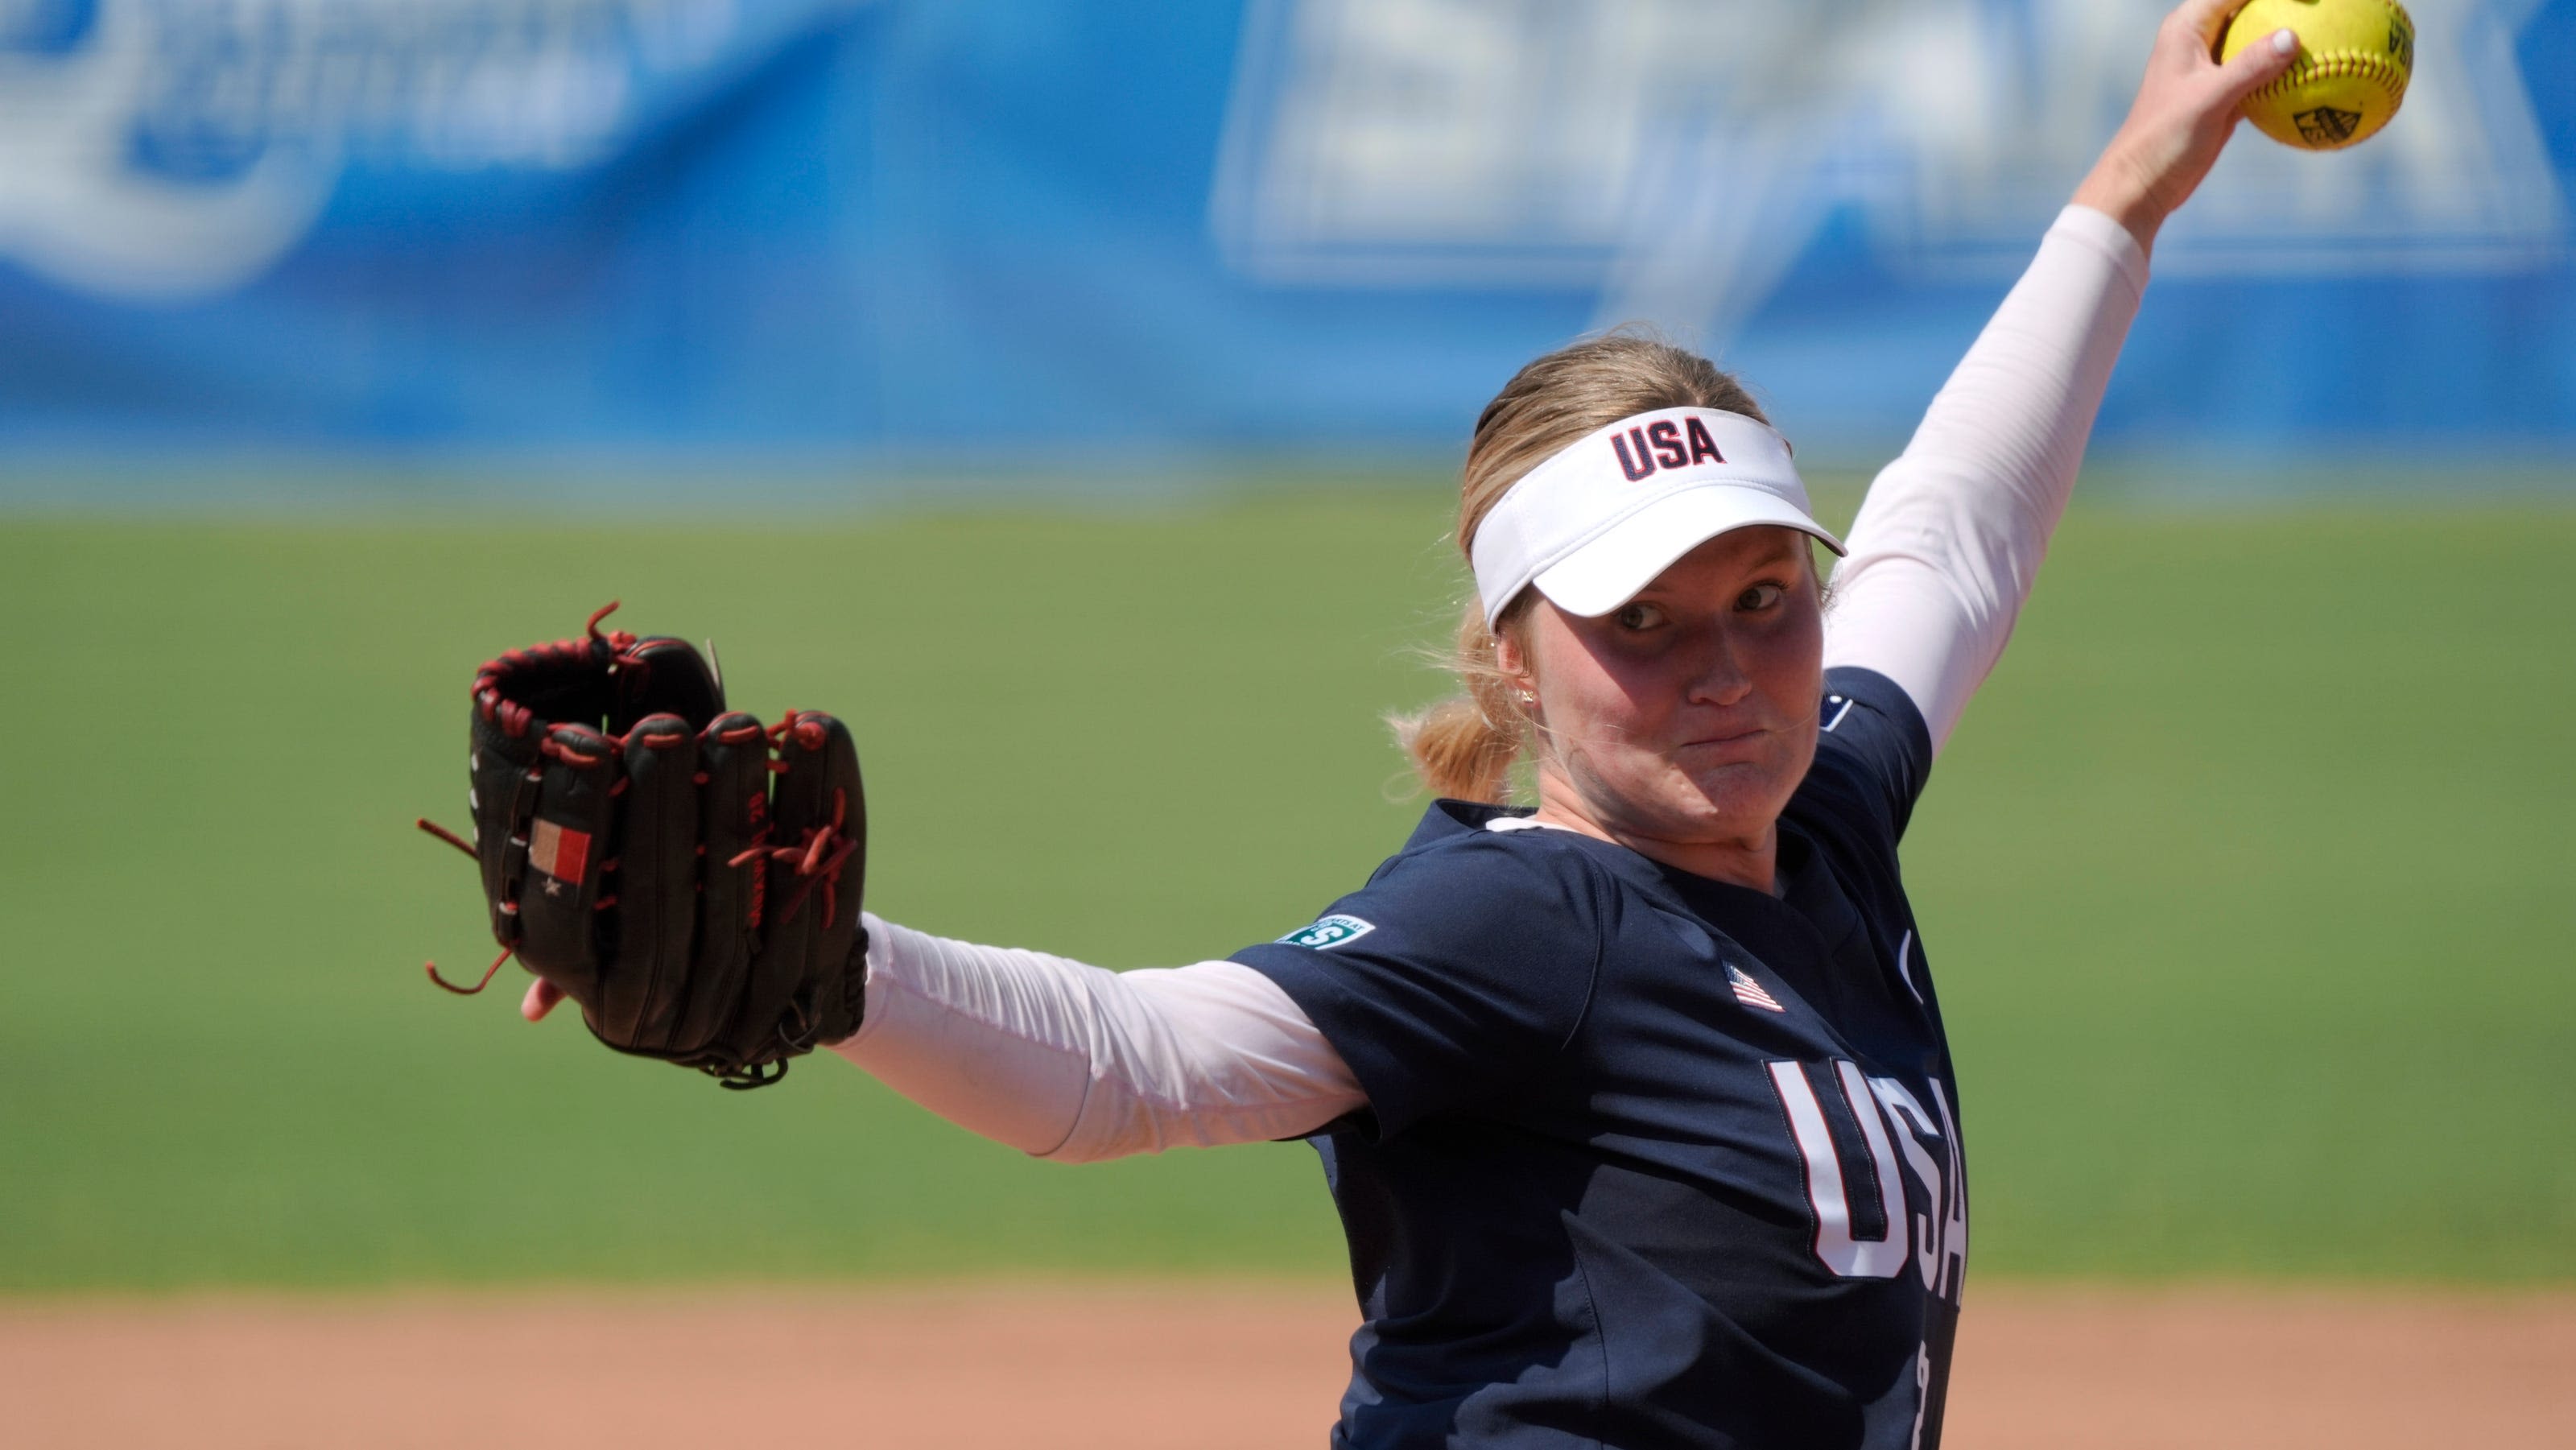 USA softball falls to Japan in WBSC World Cup gold medal game